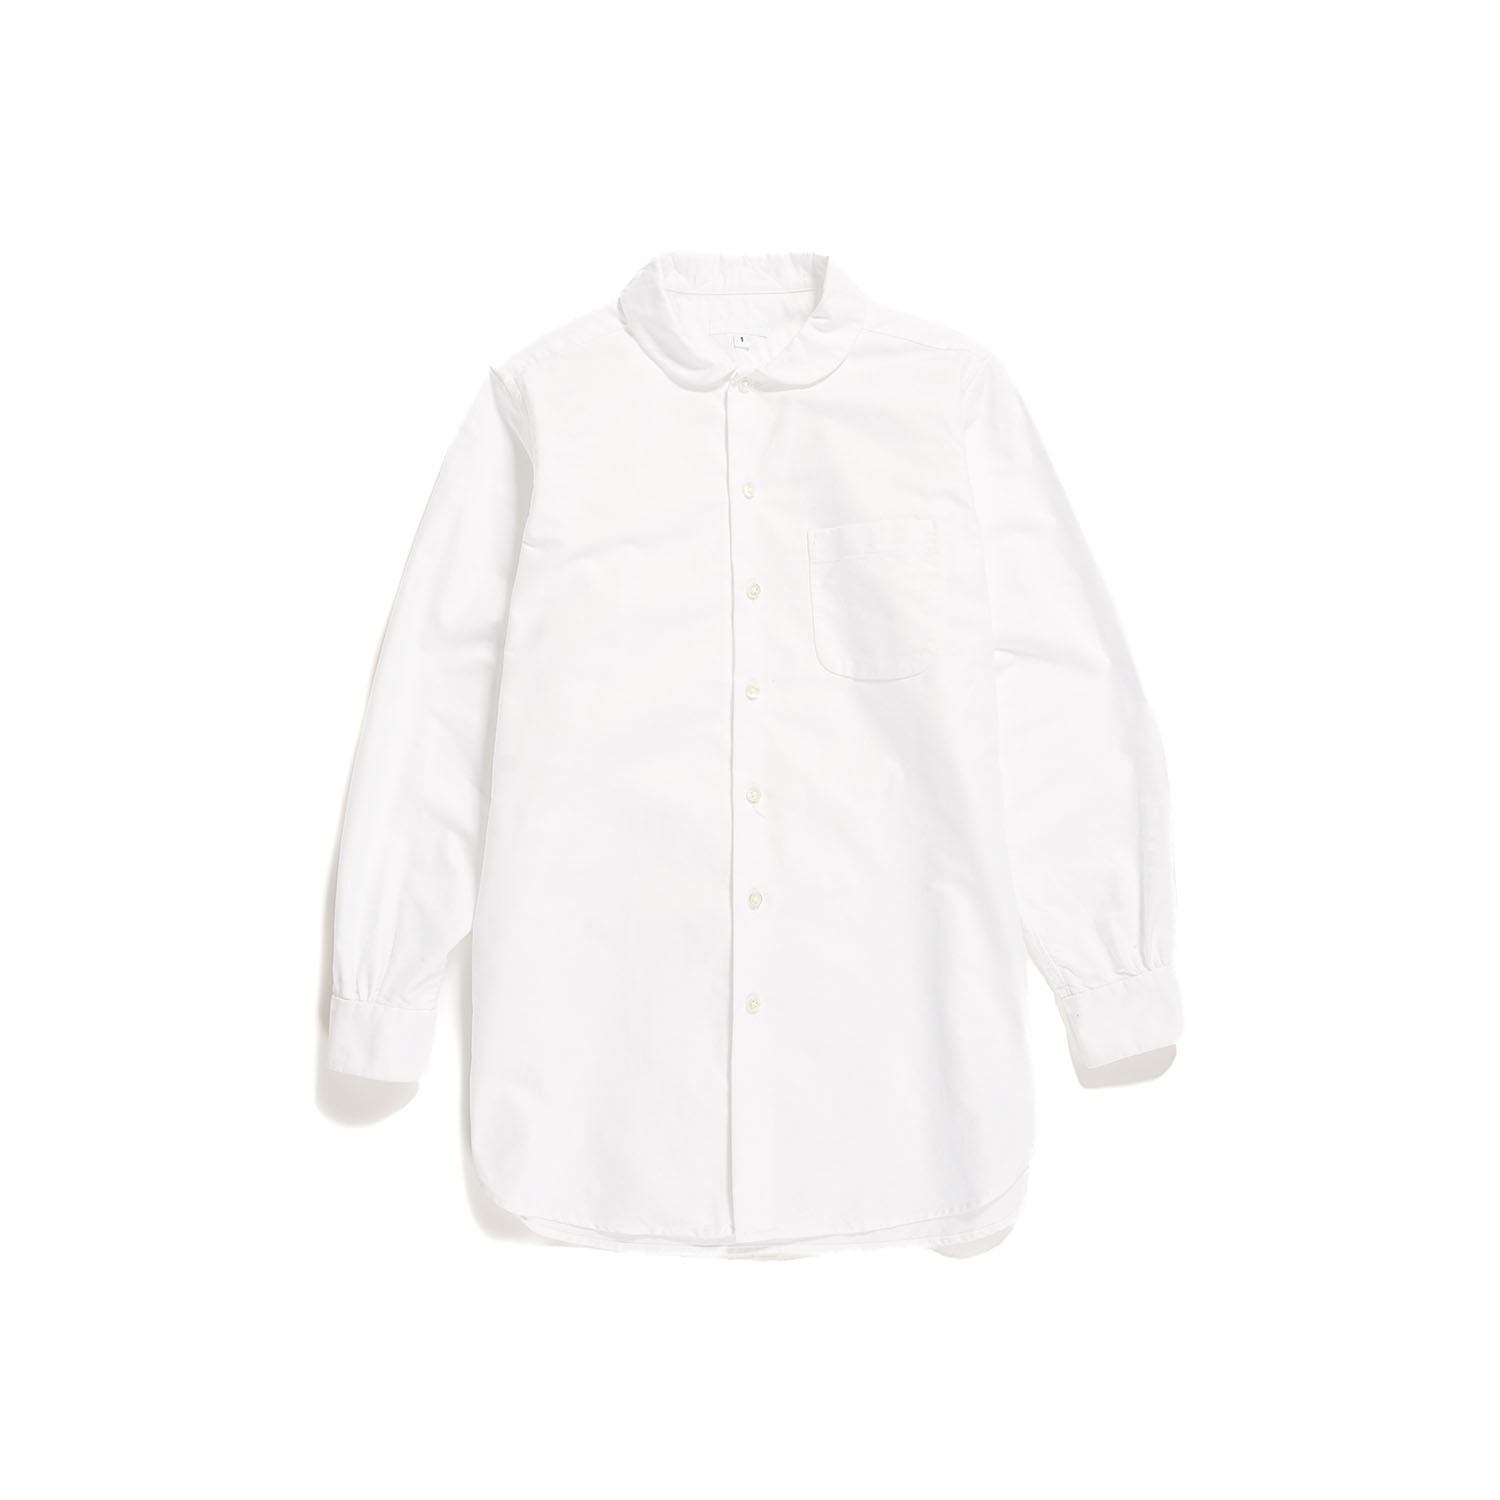 ﻿Rounded Collar Shirt - White